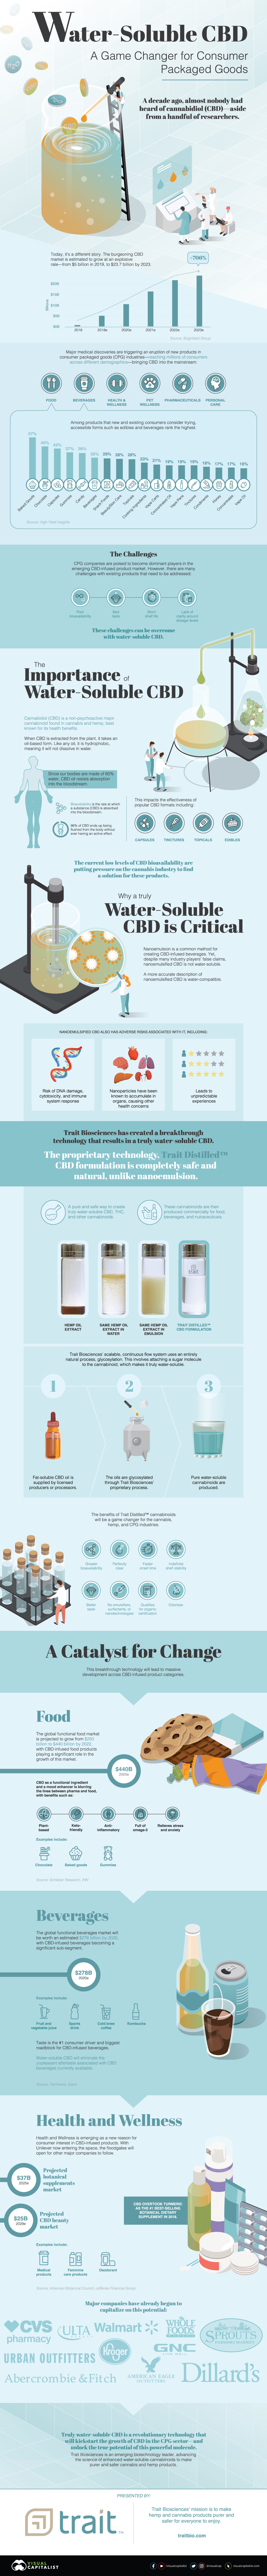 water soluble CBD products